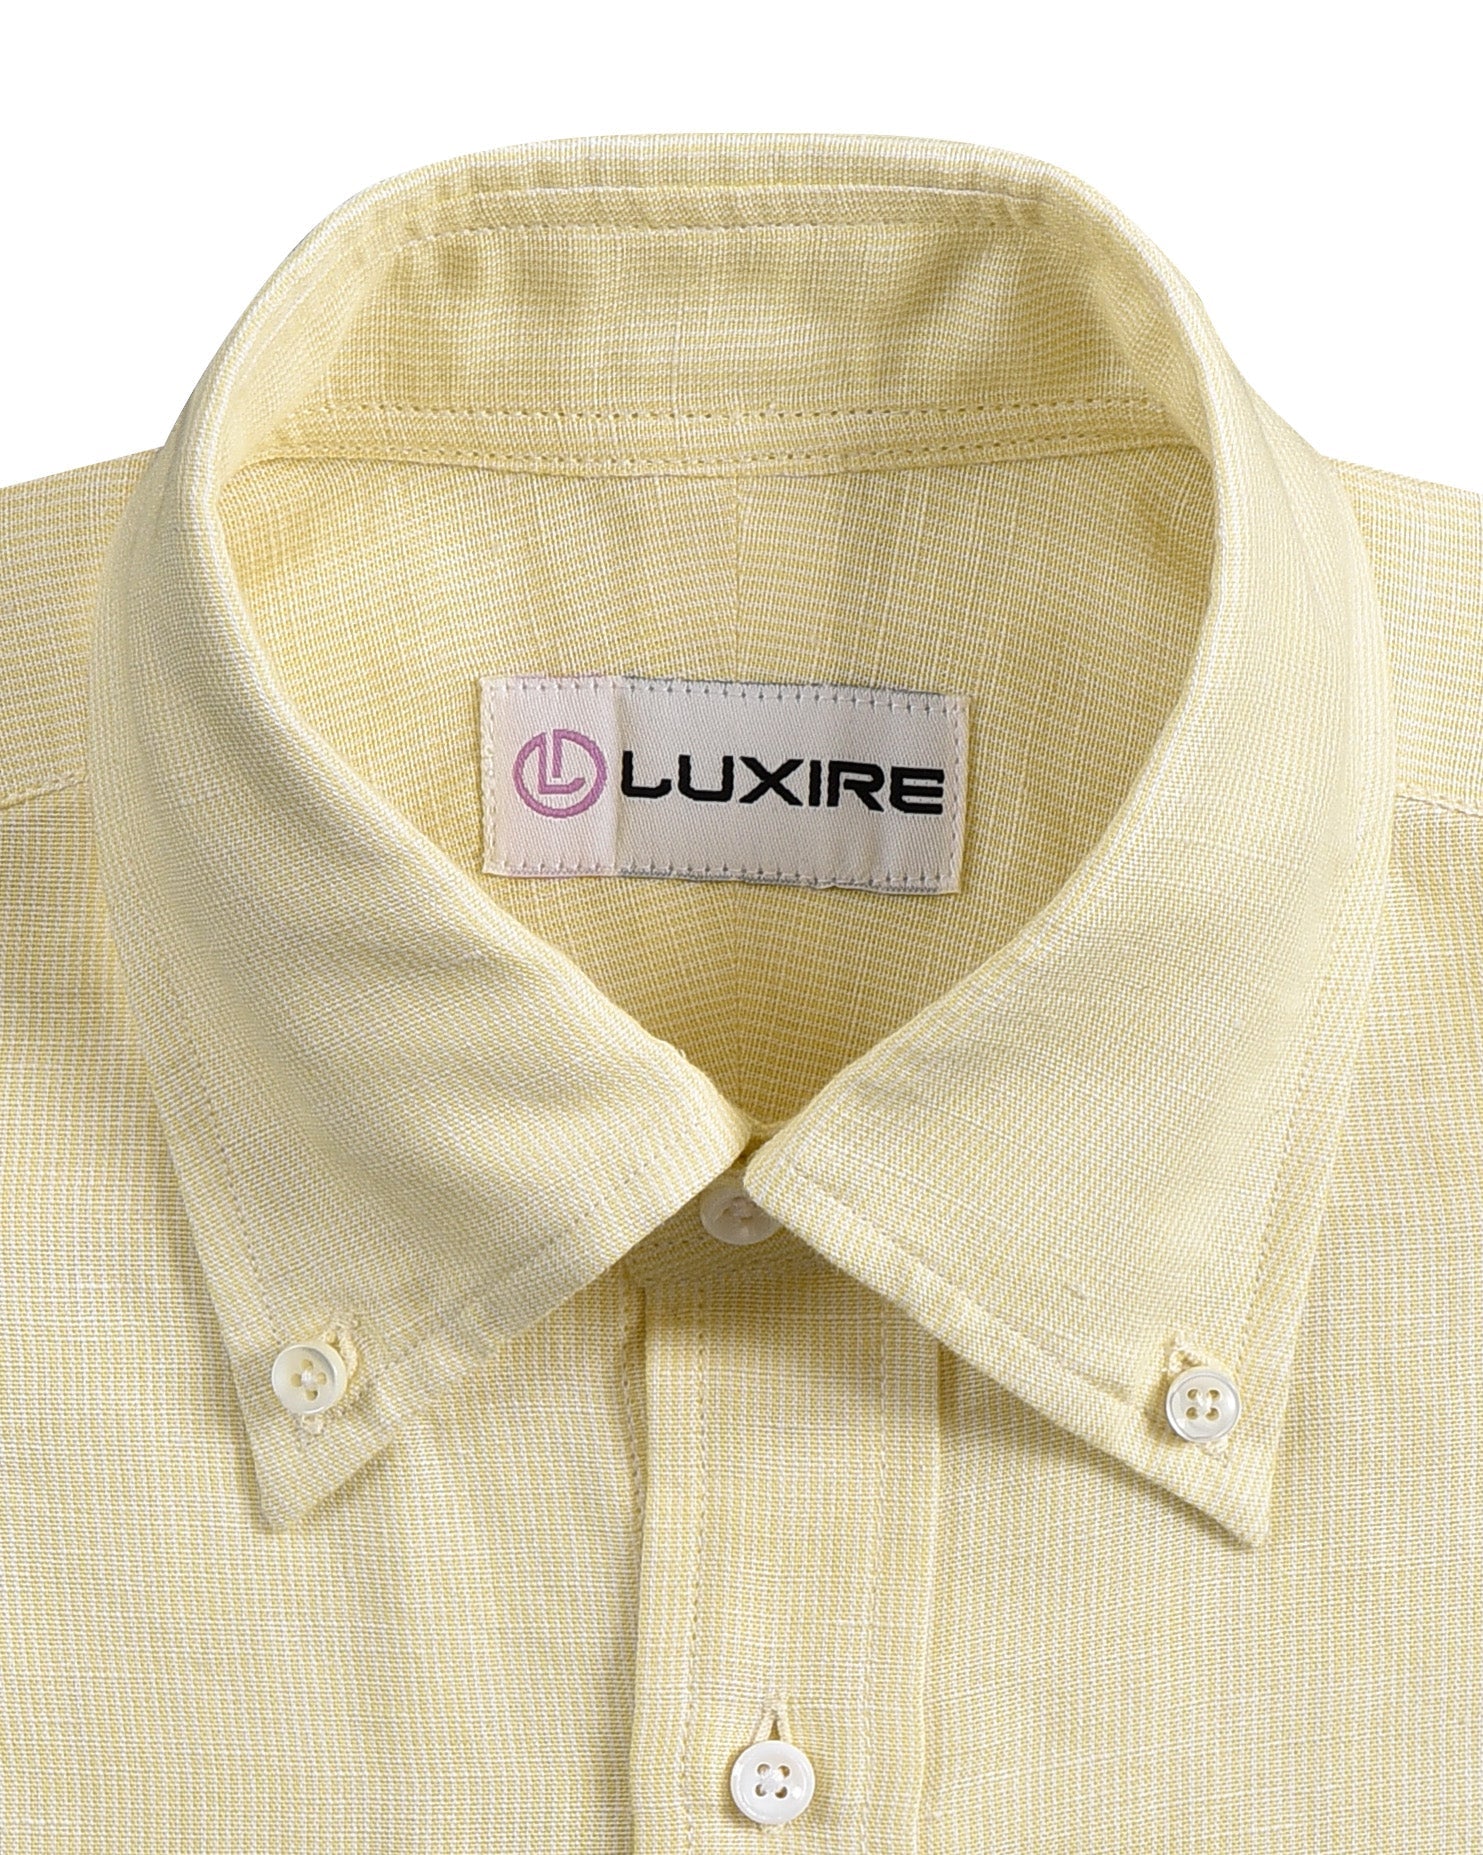 Collar of the custom linen shirt for men in pastel yellow by Luxire Clothing